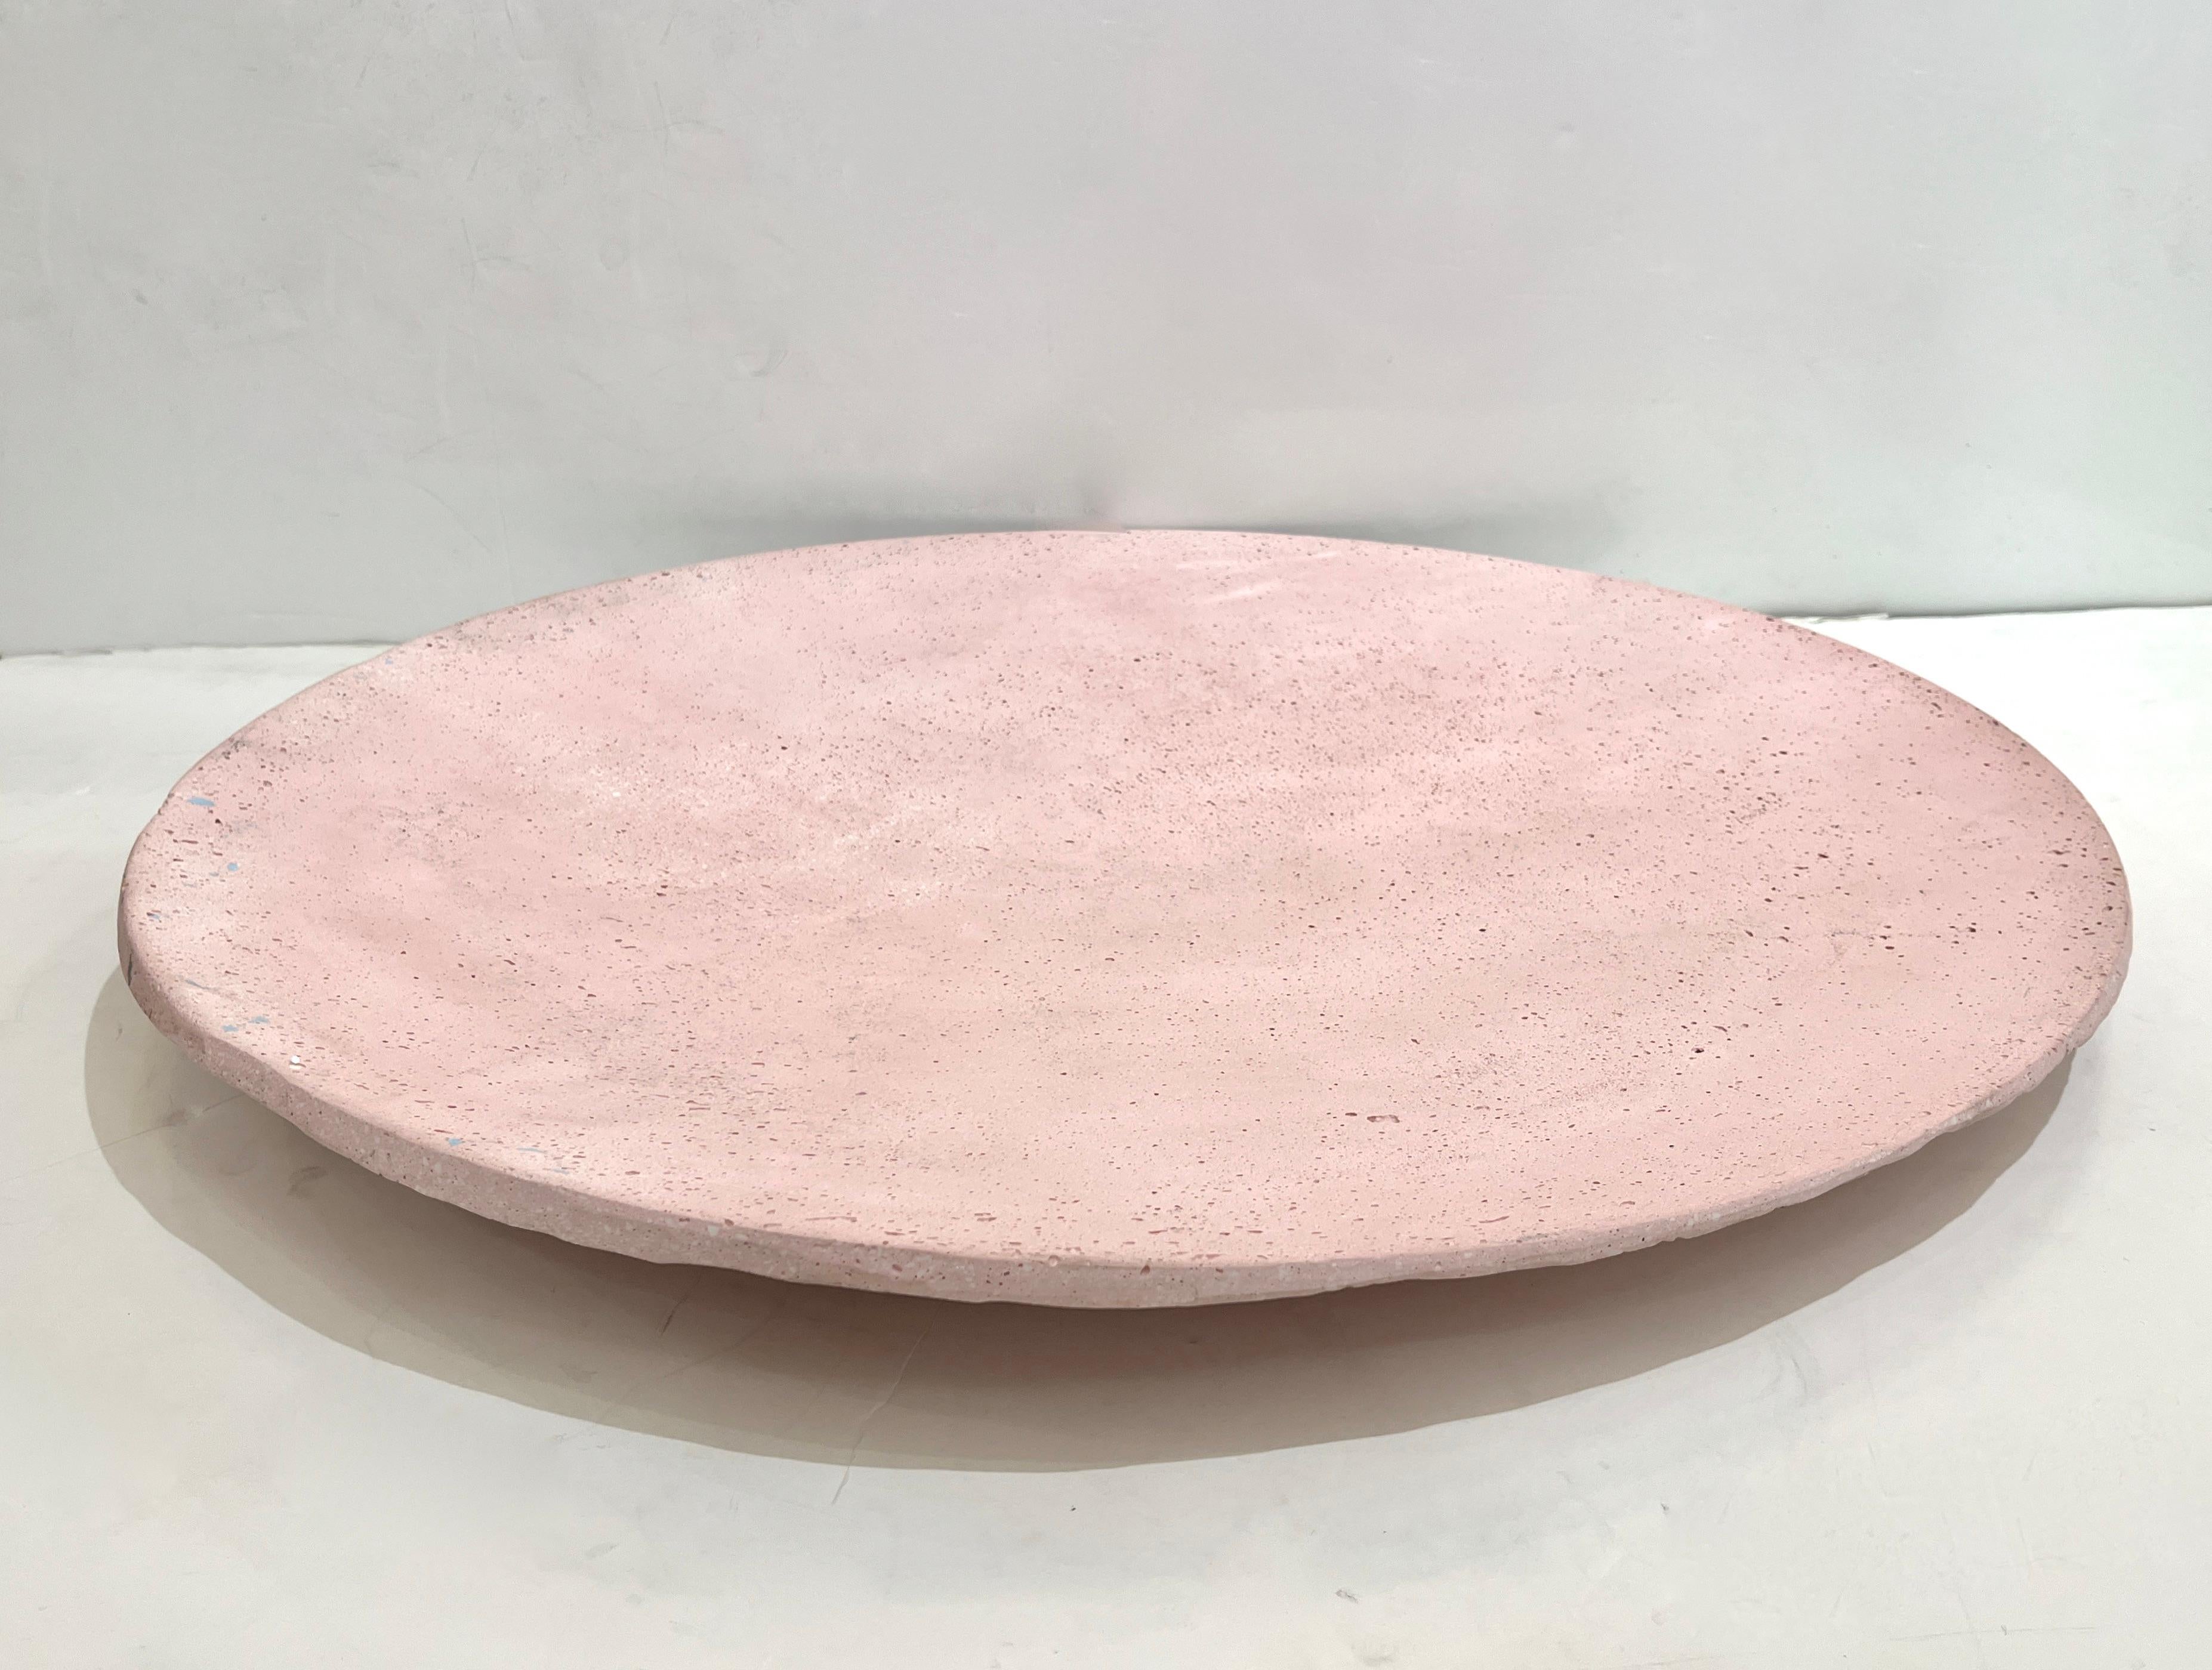 This organic amorphous centerpiece, in blush pink rose color with splashes of light blue, is created as a centerpiece of Art or Wall Art by Italian artist and designer, GioMinelli. Realized using and mixing recycled fiberglass and resin with the